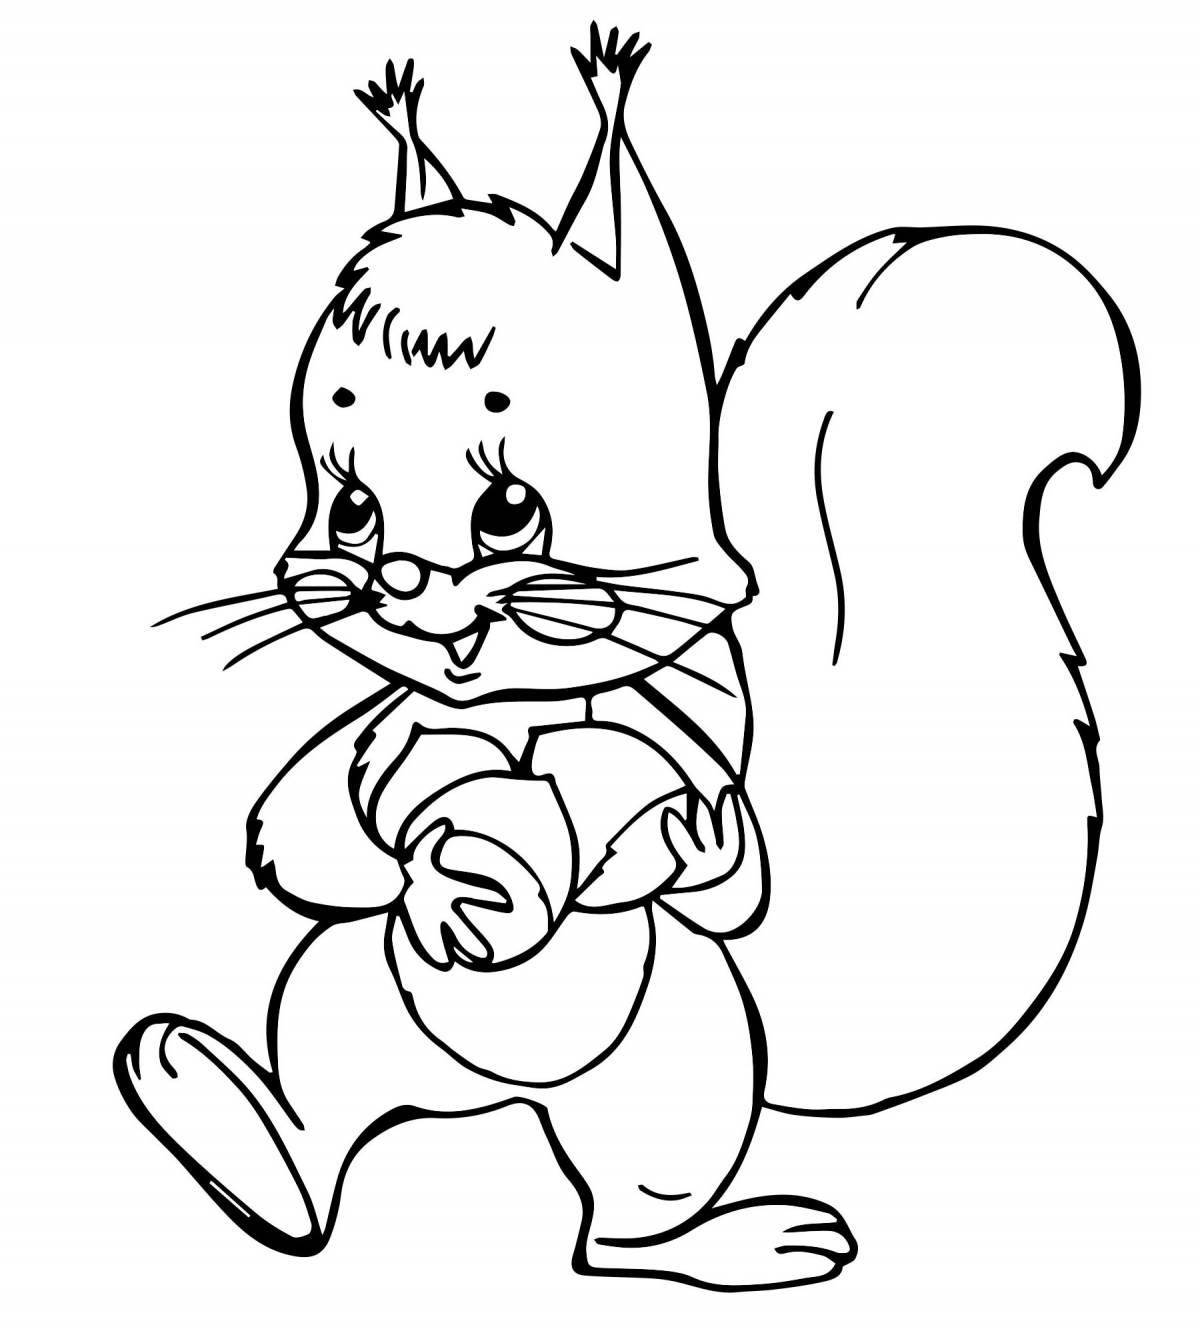 Playful squirrel coloring book for 2-3 year olds